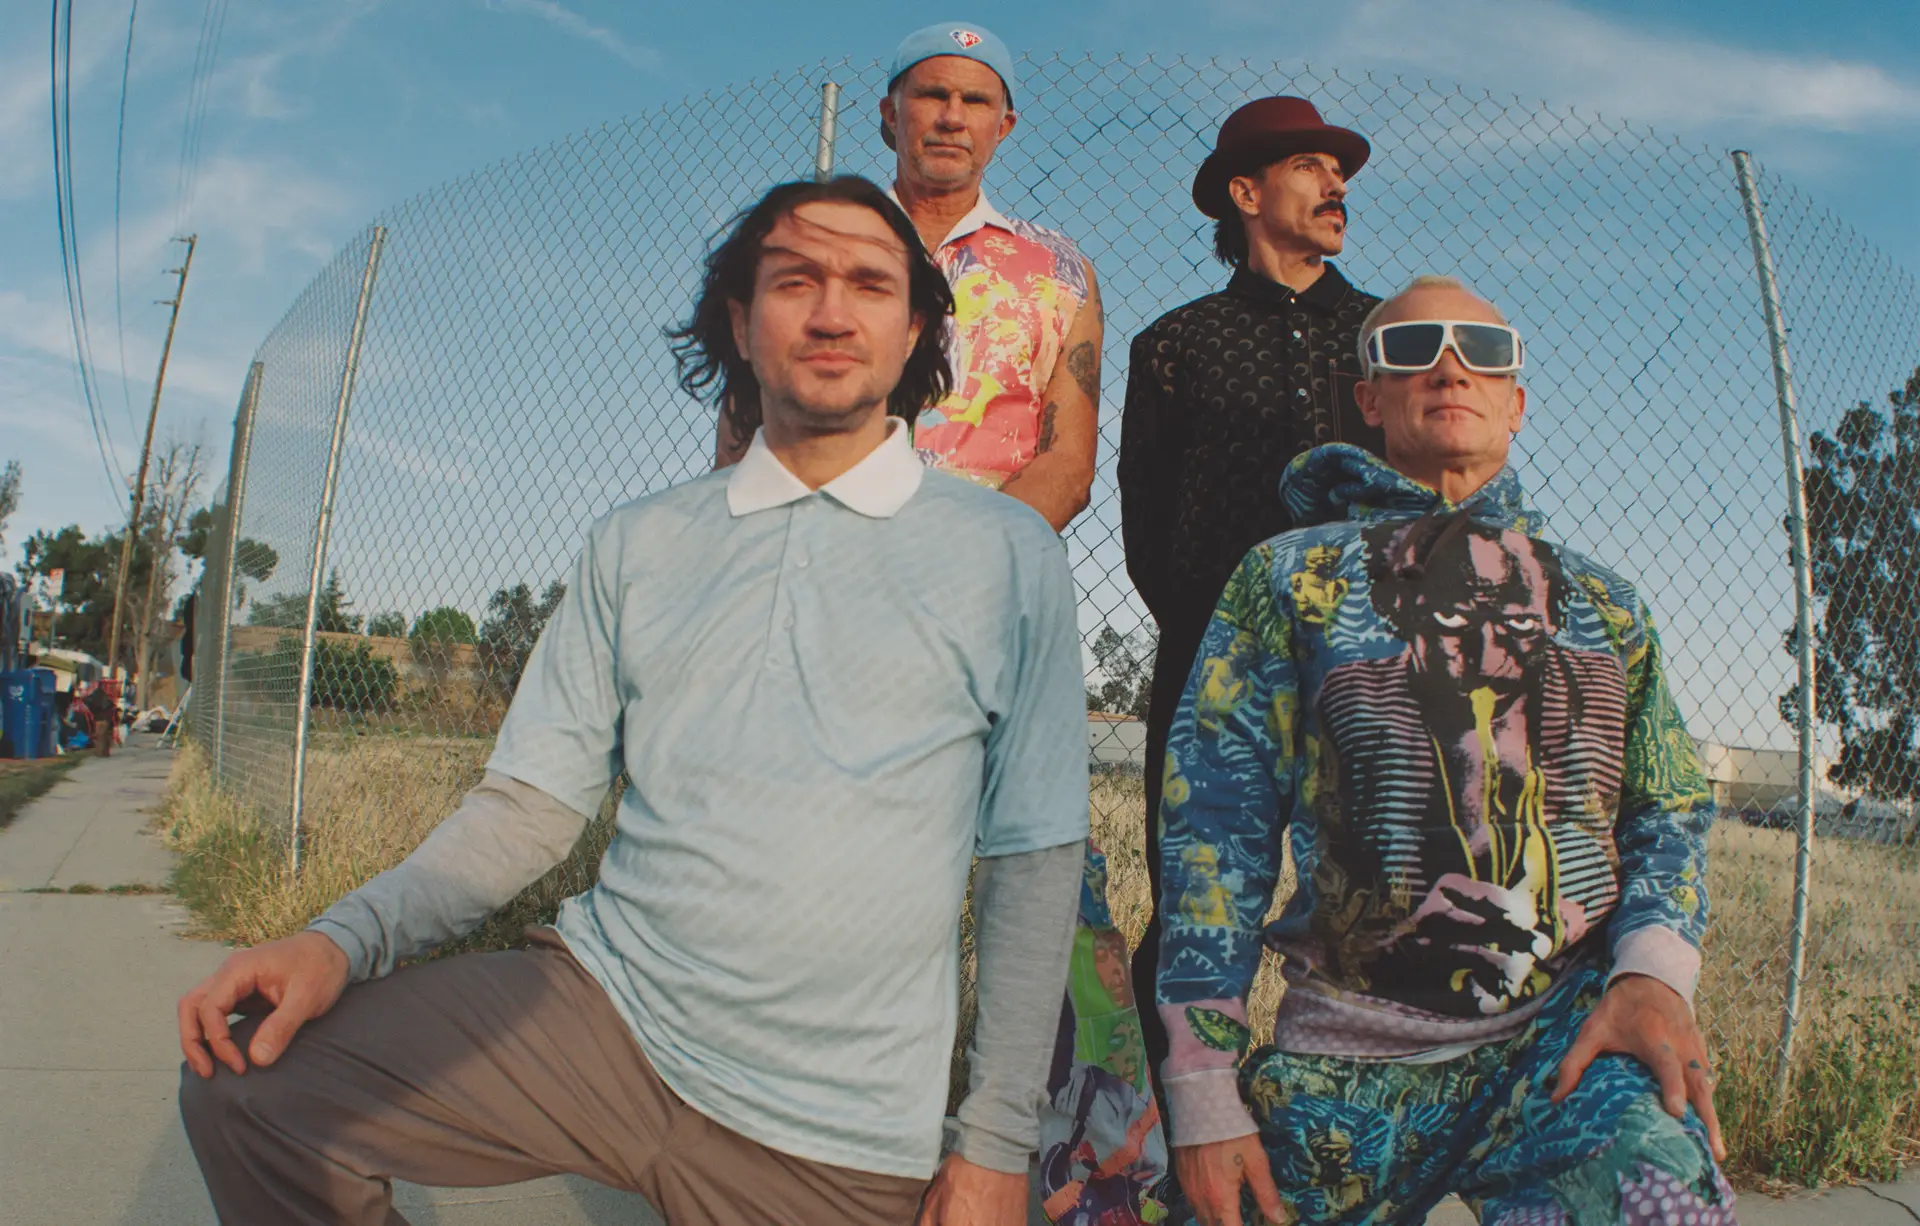 Red Hot Chili Peppers confirmados no festival NOS Alive